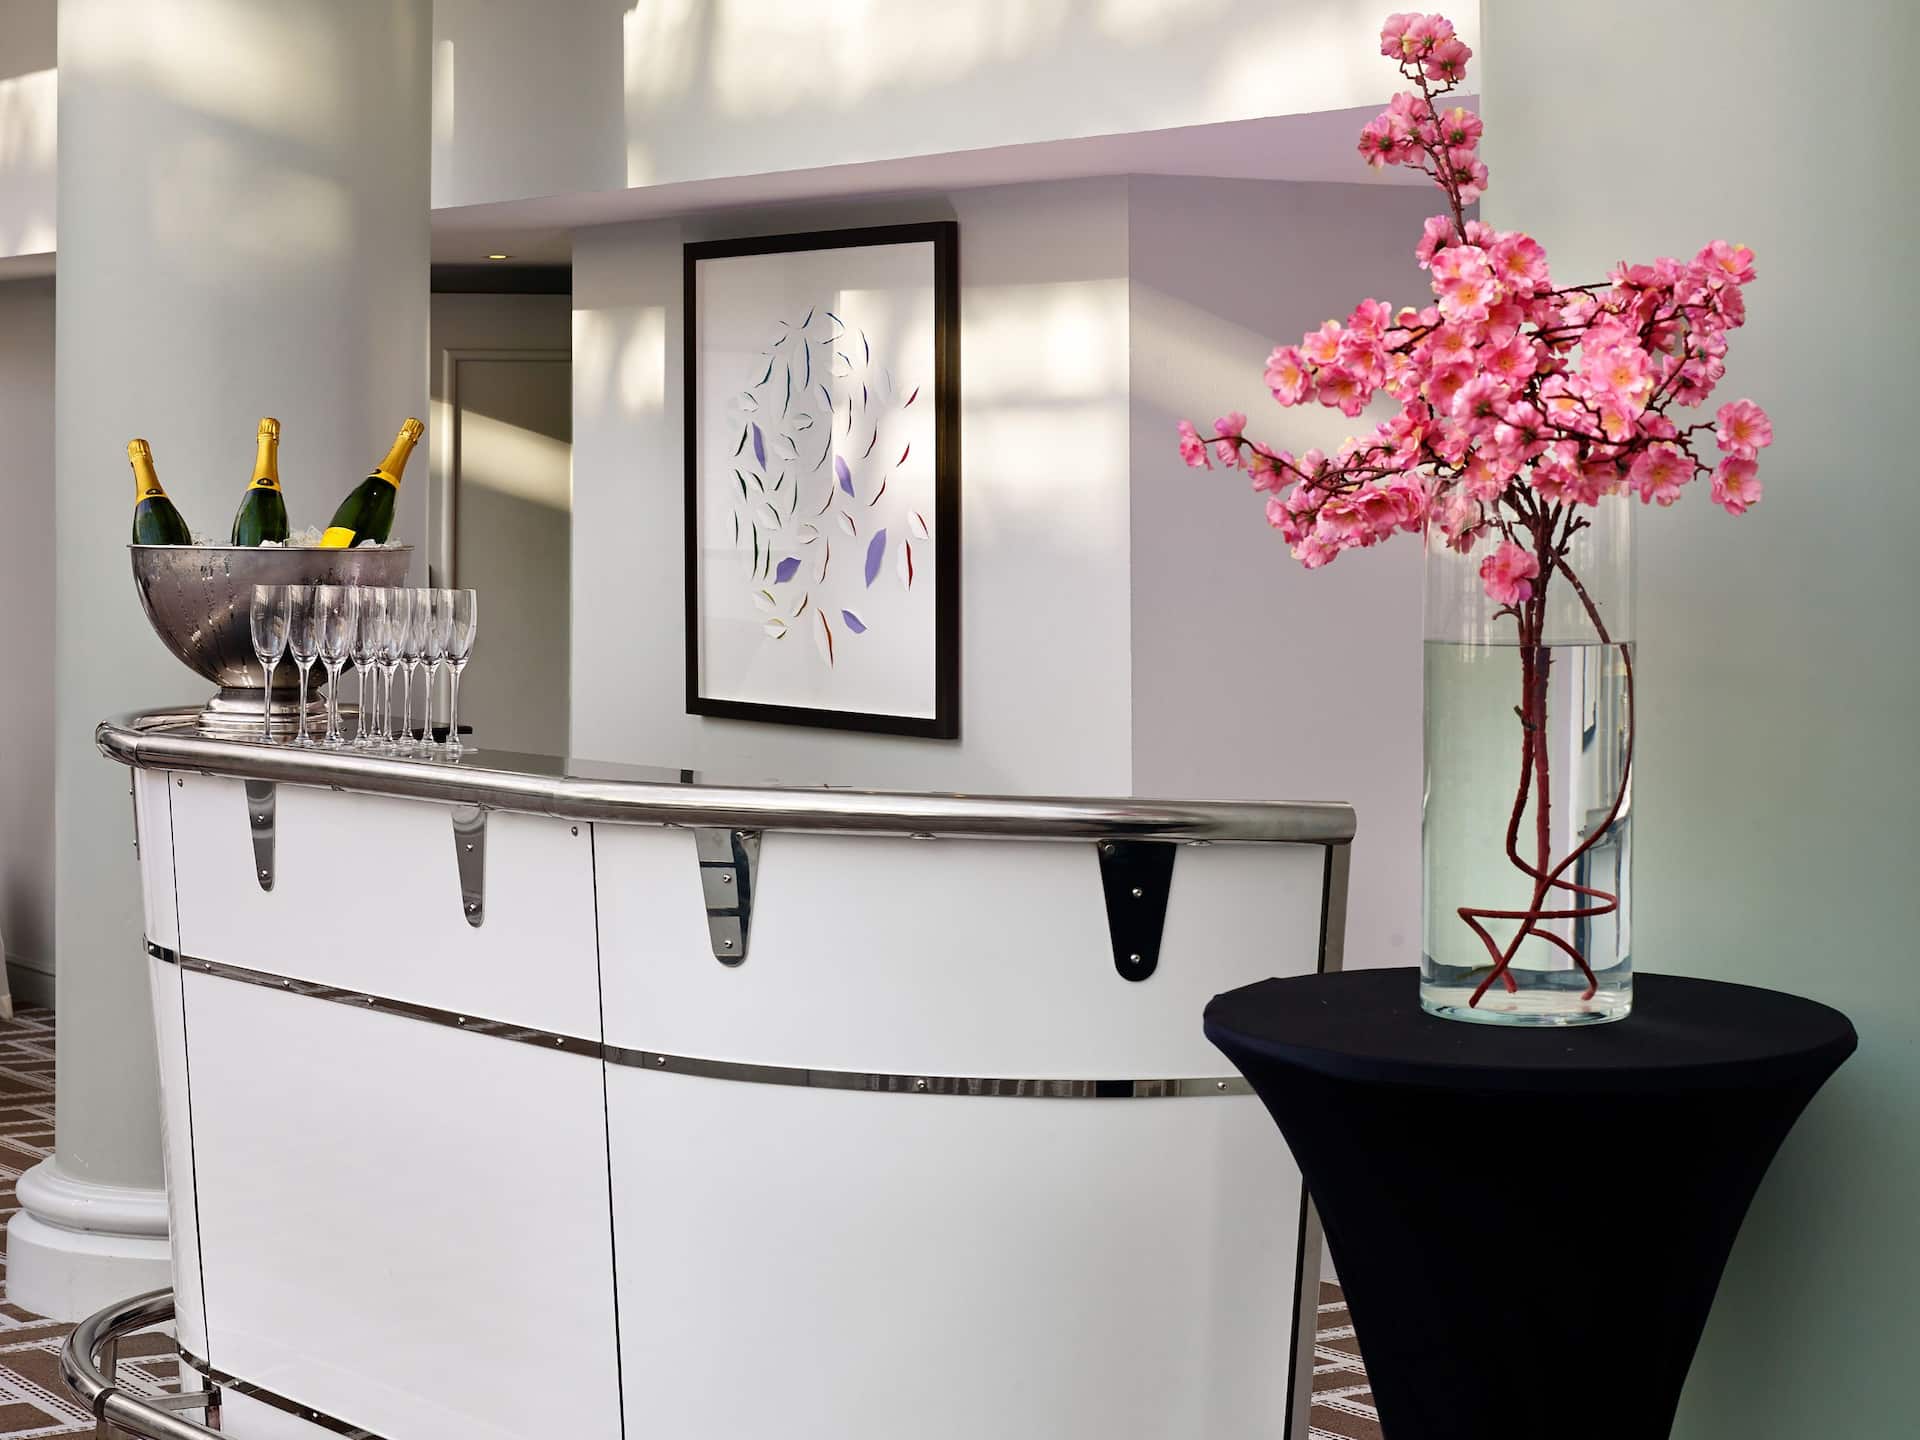 Lobby area with flowers and champagne